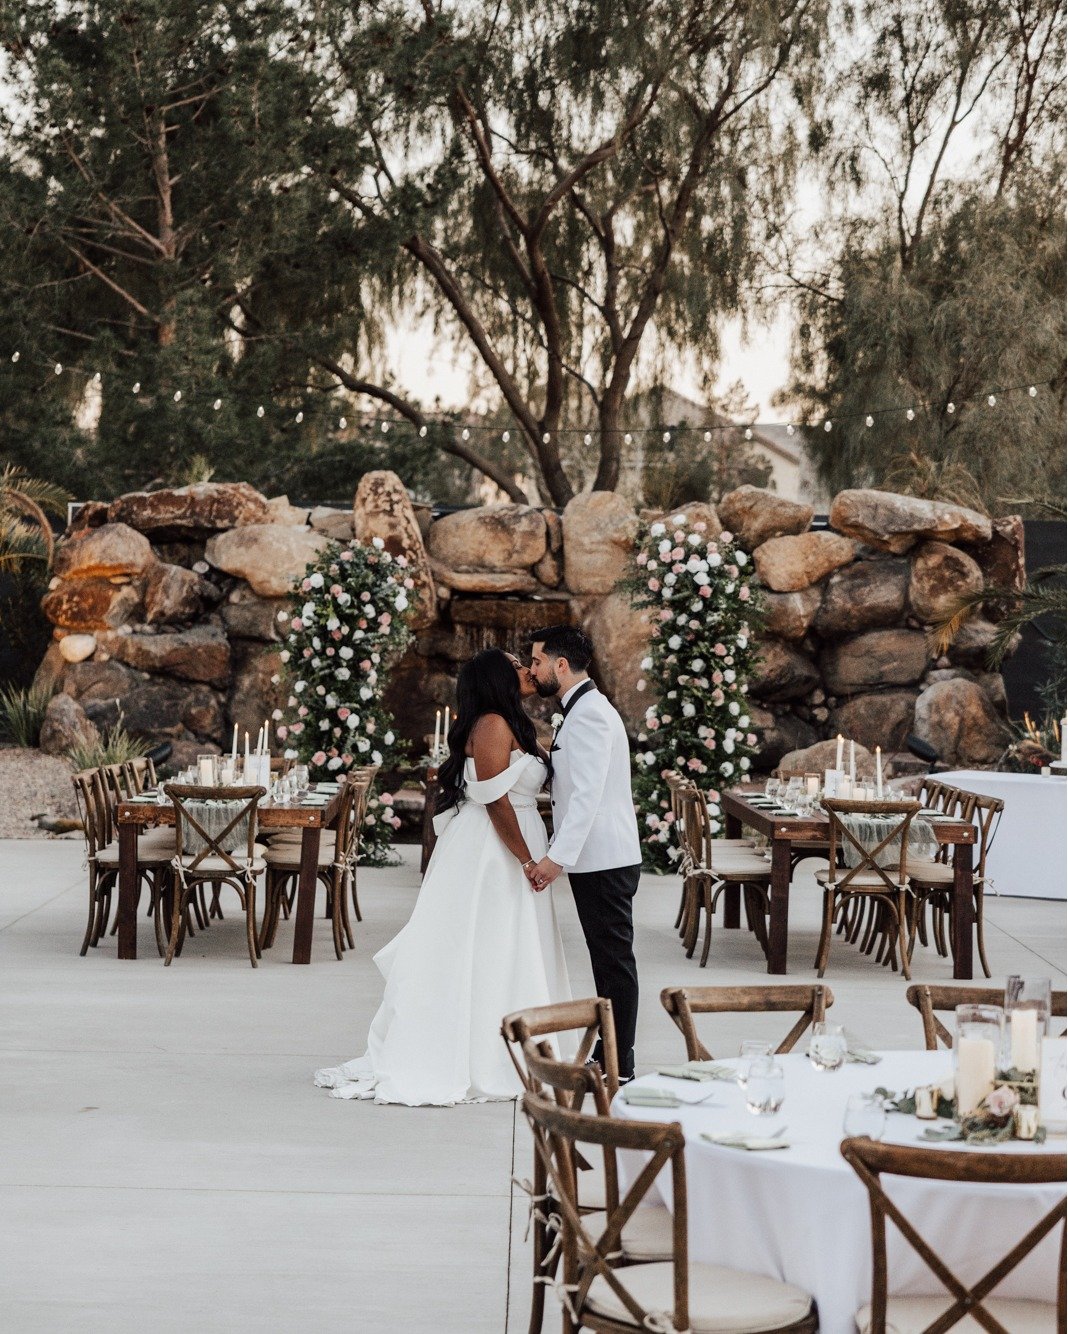 We pride ourselves in being one of the very few indoor and outdoor event venues Las Vegas has to offer.
With the flexibility of hosting your reception indoors, outdoors, or both, Lotus House is the premier mansion style venue with flexibility, style,